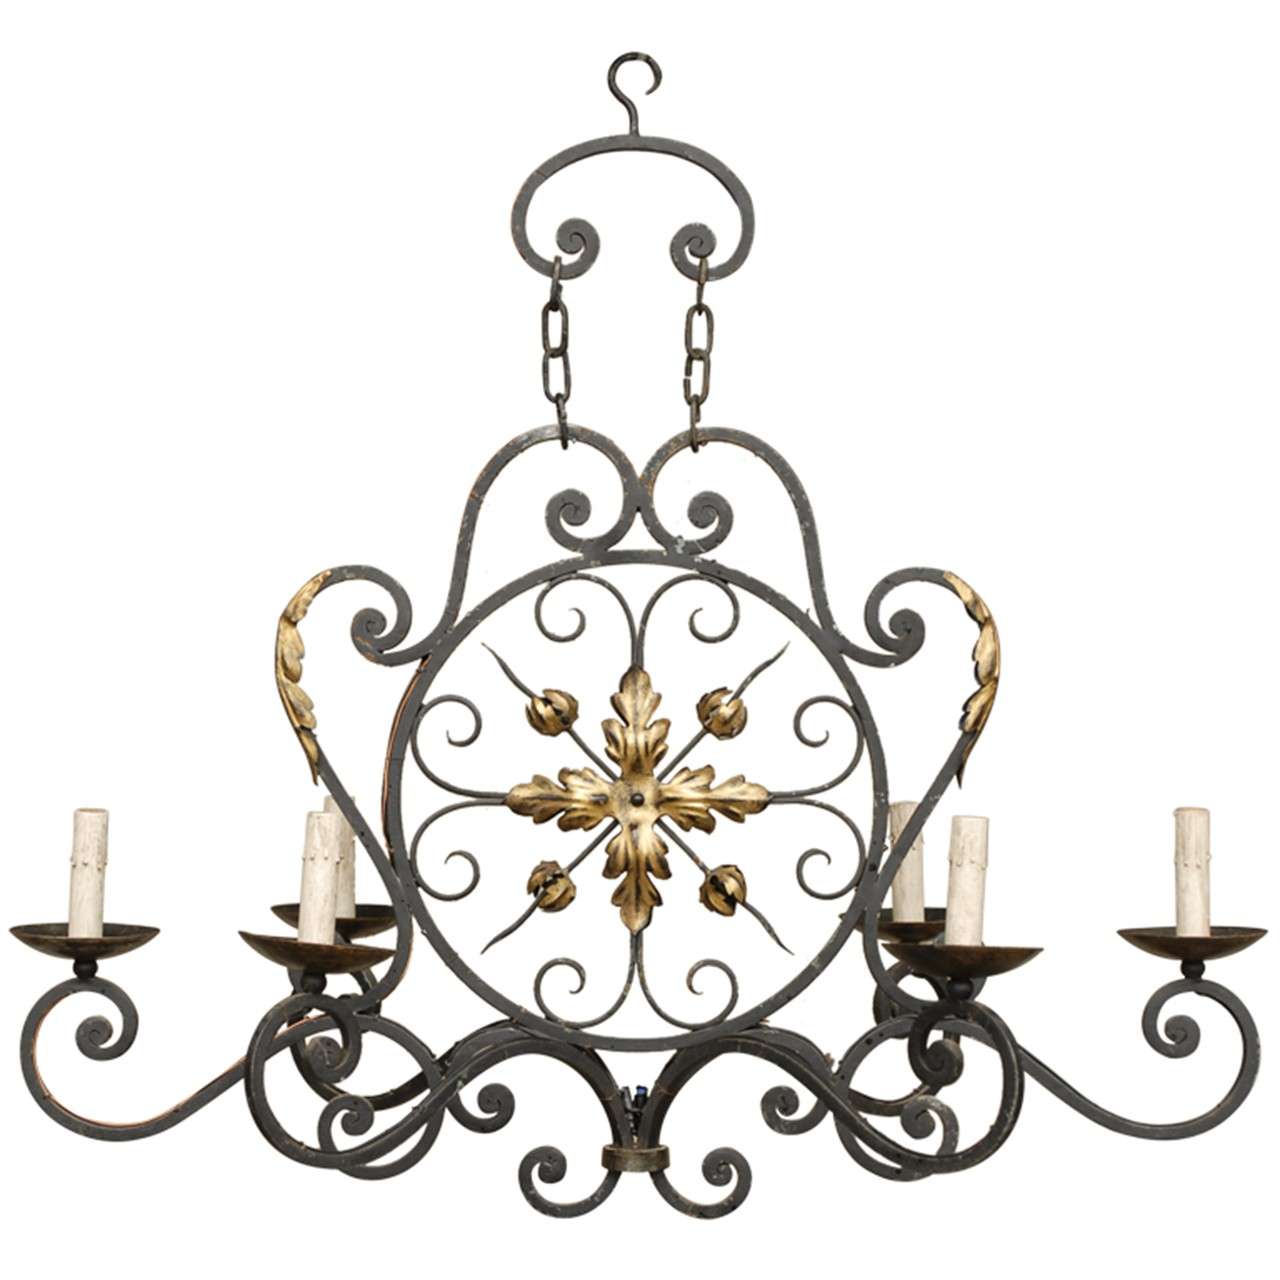 French Six-Light Forged Iron Chandelier